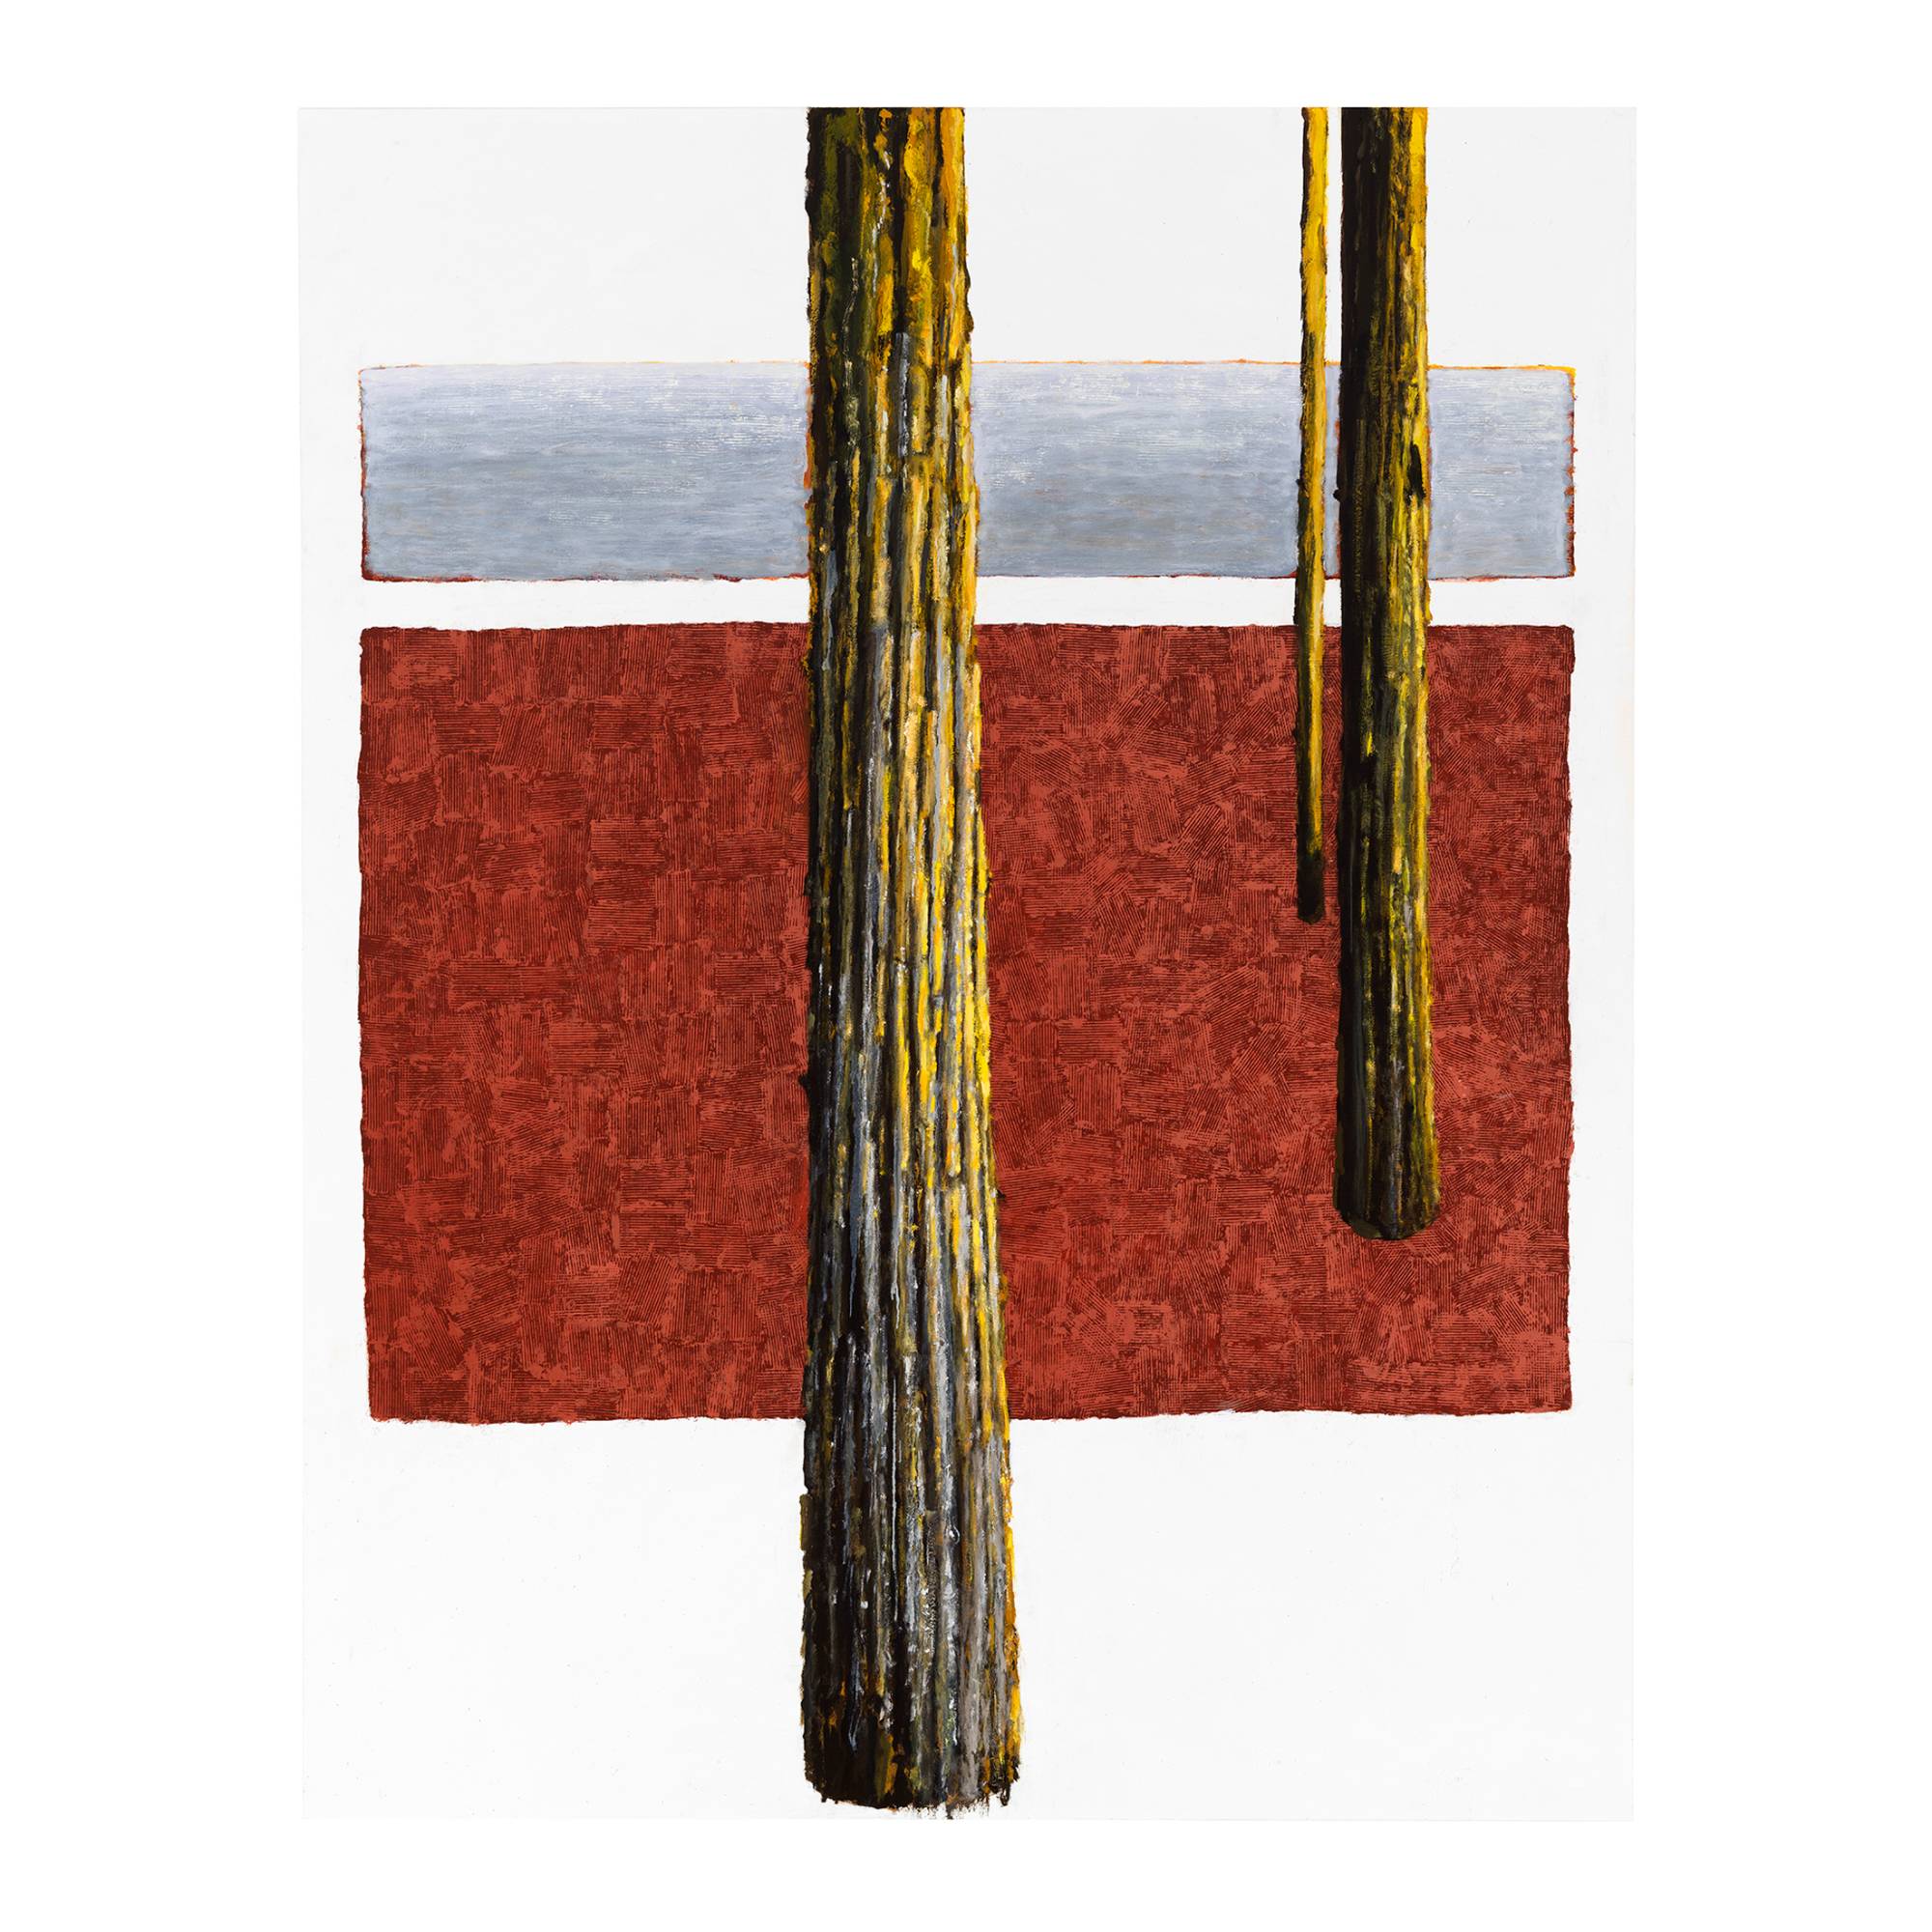 Painting by Vera Klement titled 'Witnesses' tree trunks floating on a red square and a grey rectangle